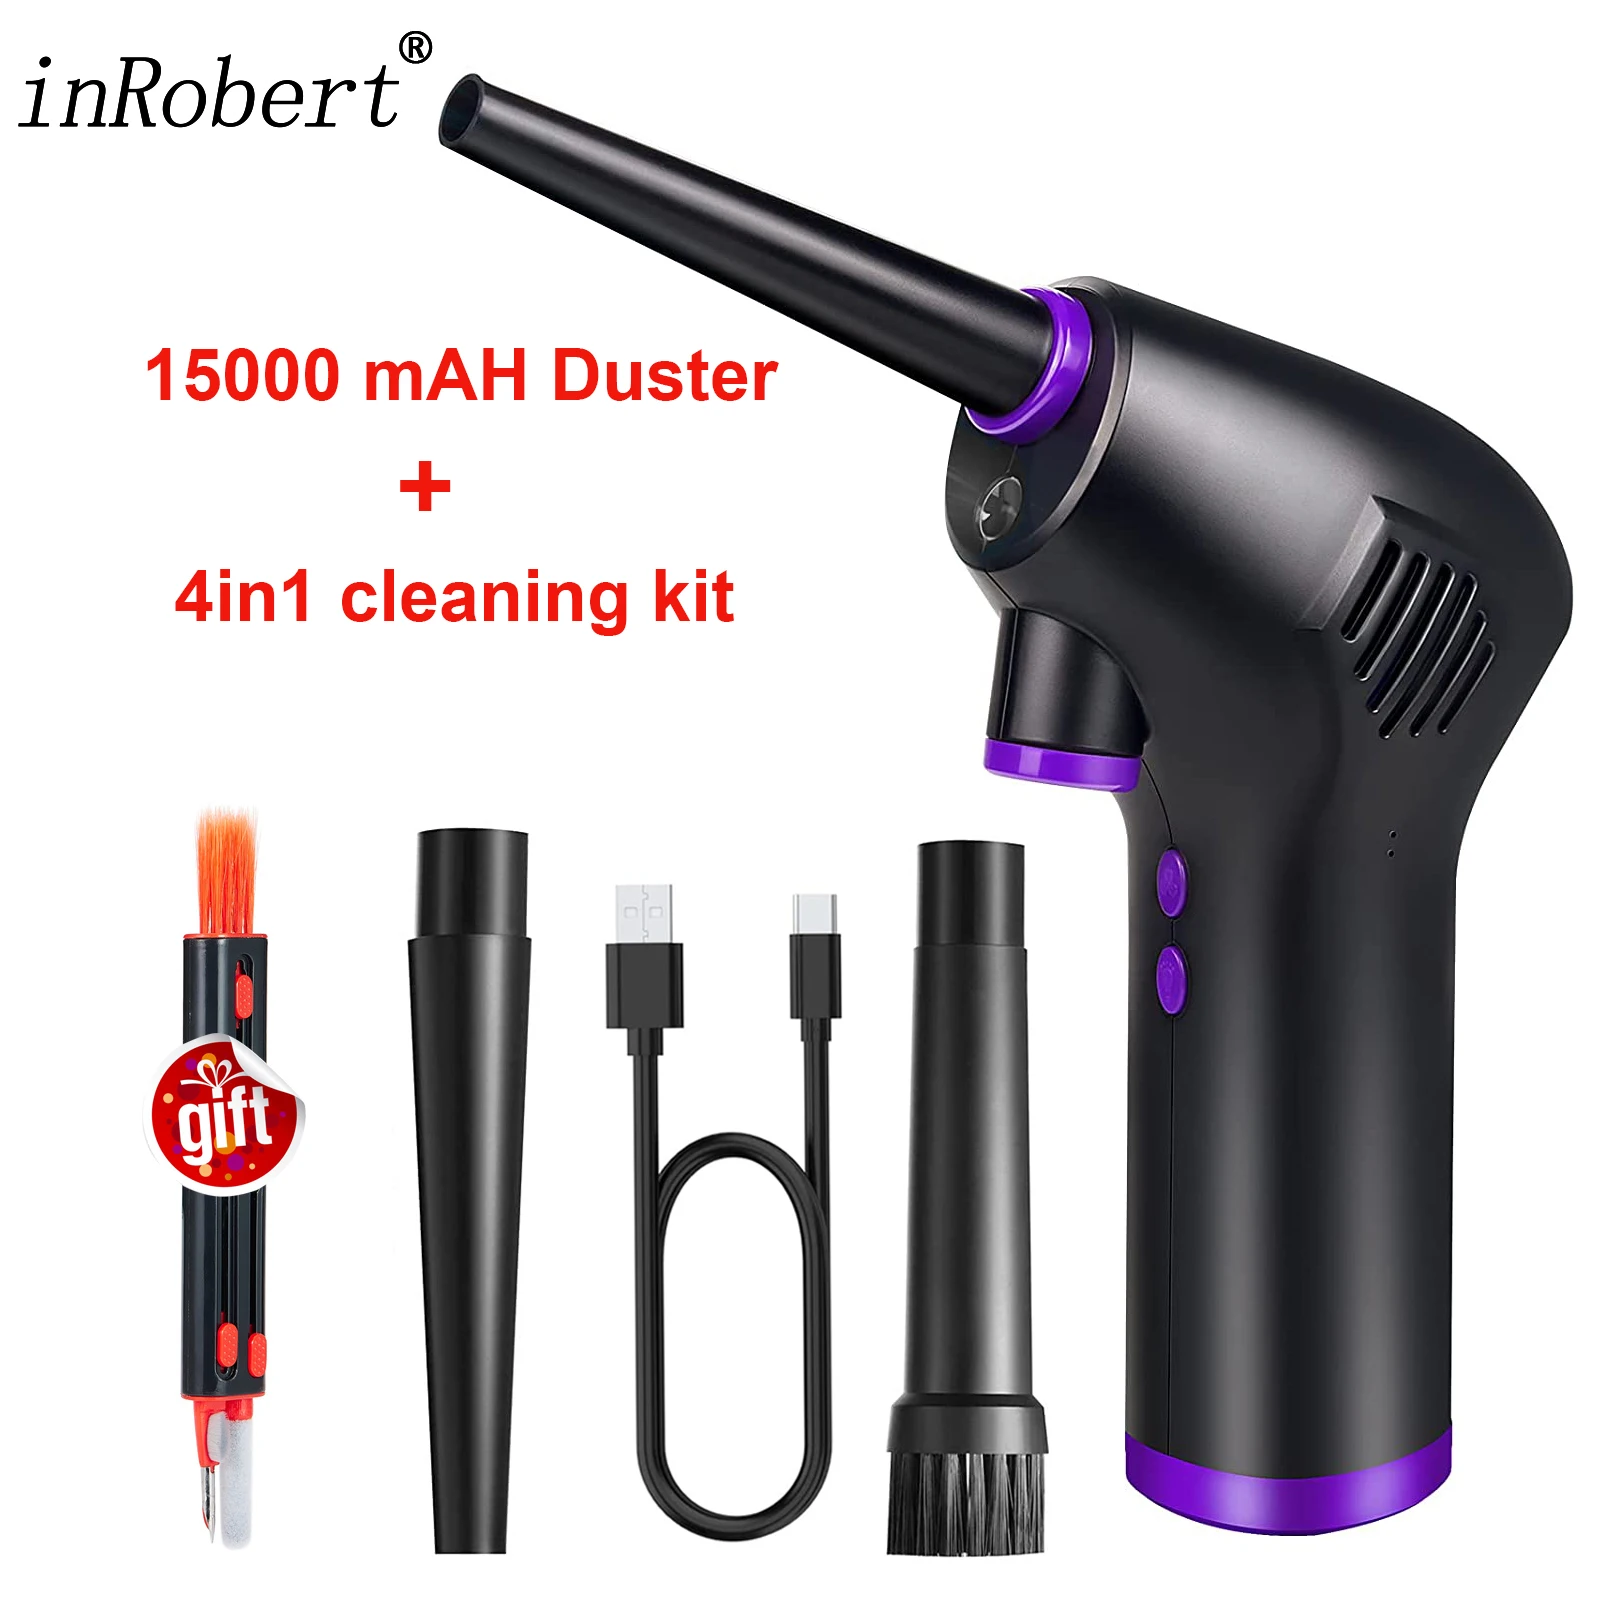 Wireless Air Duster 15000mAH Dust Blowing Gun Compressed Air Blower Cleaning For Computer bluetooth earphone Laptop Cleaning Kit